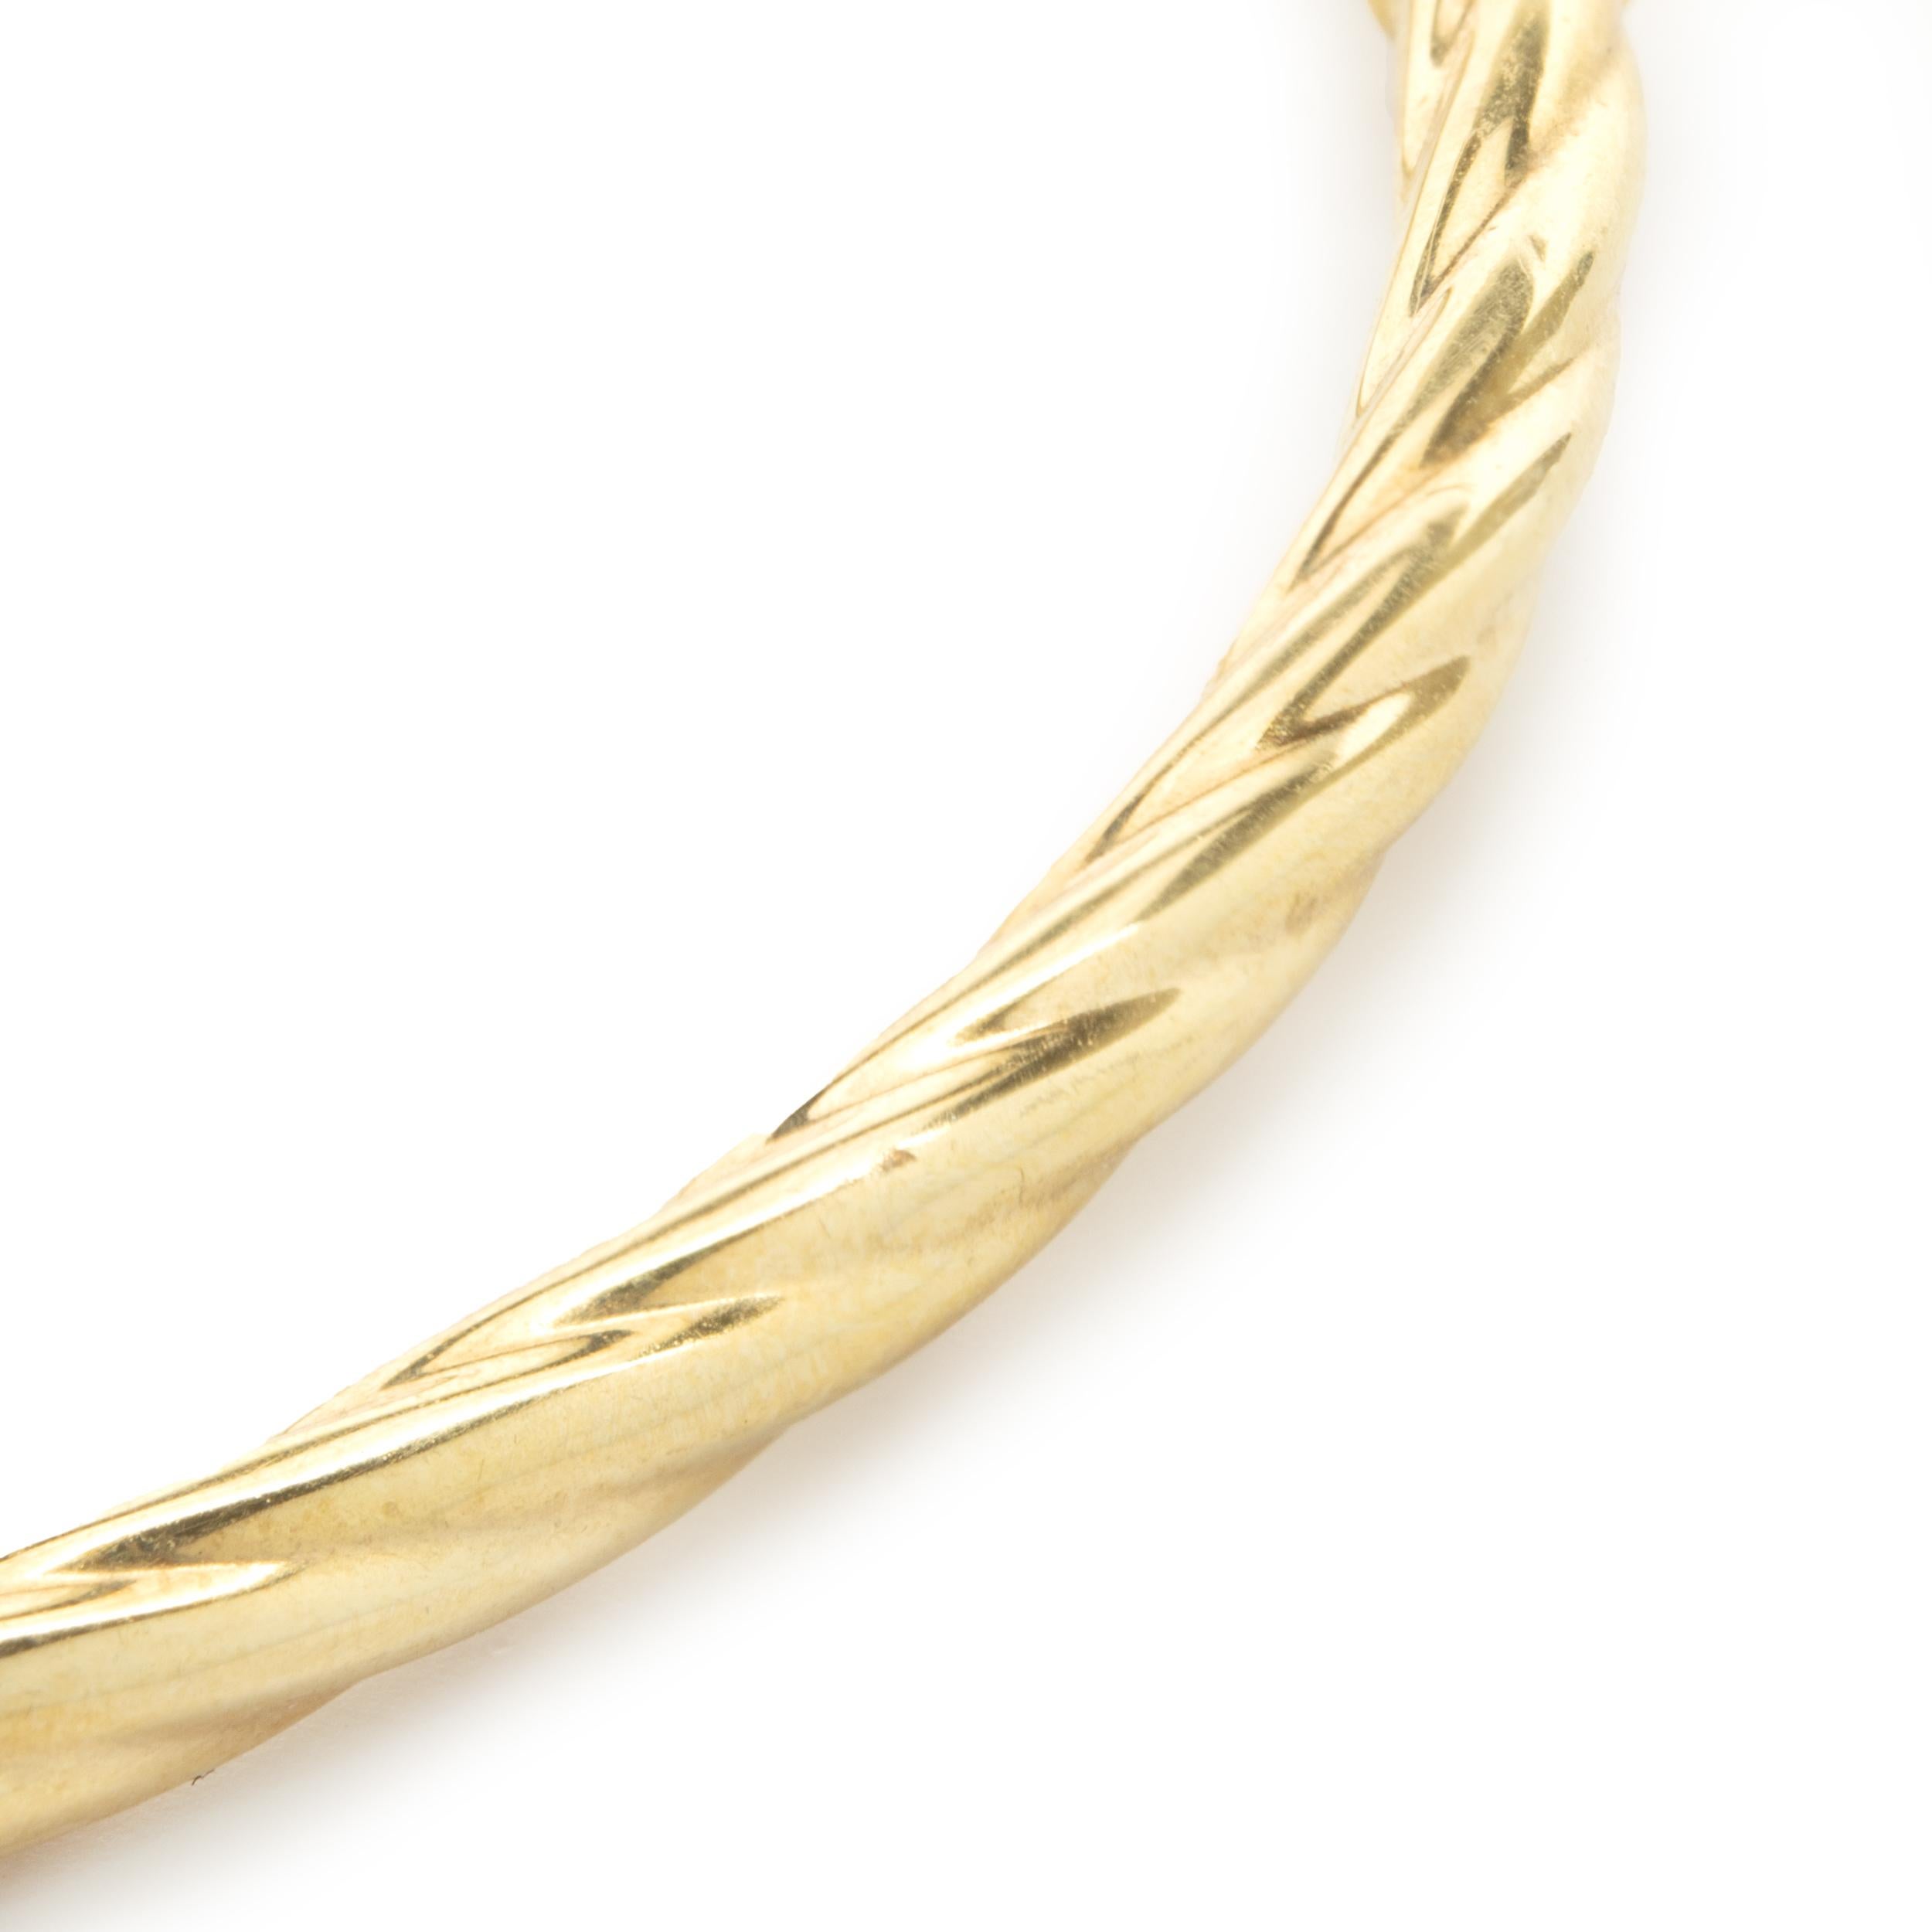 Material: 14K yellow gold
Dimensions: bracelet will fit up to an 7-inch wrist
Weight: 2.12 grams
